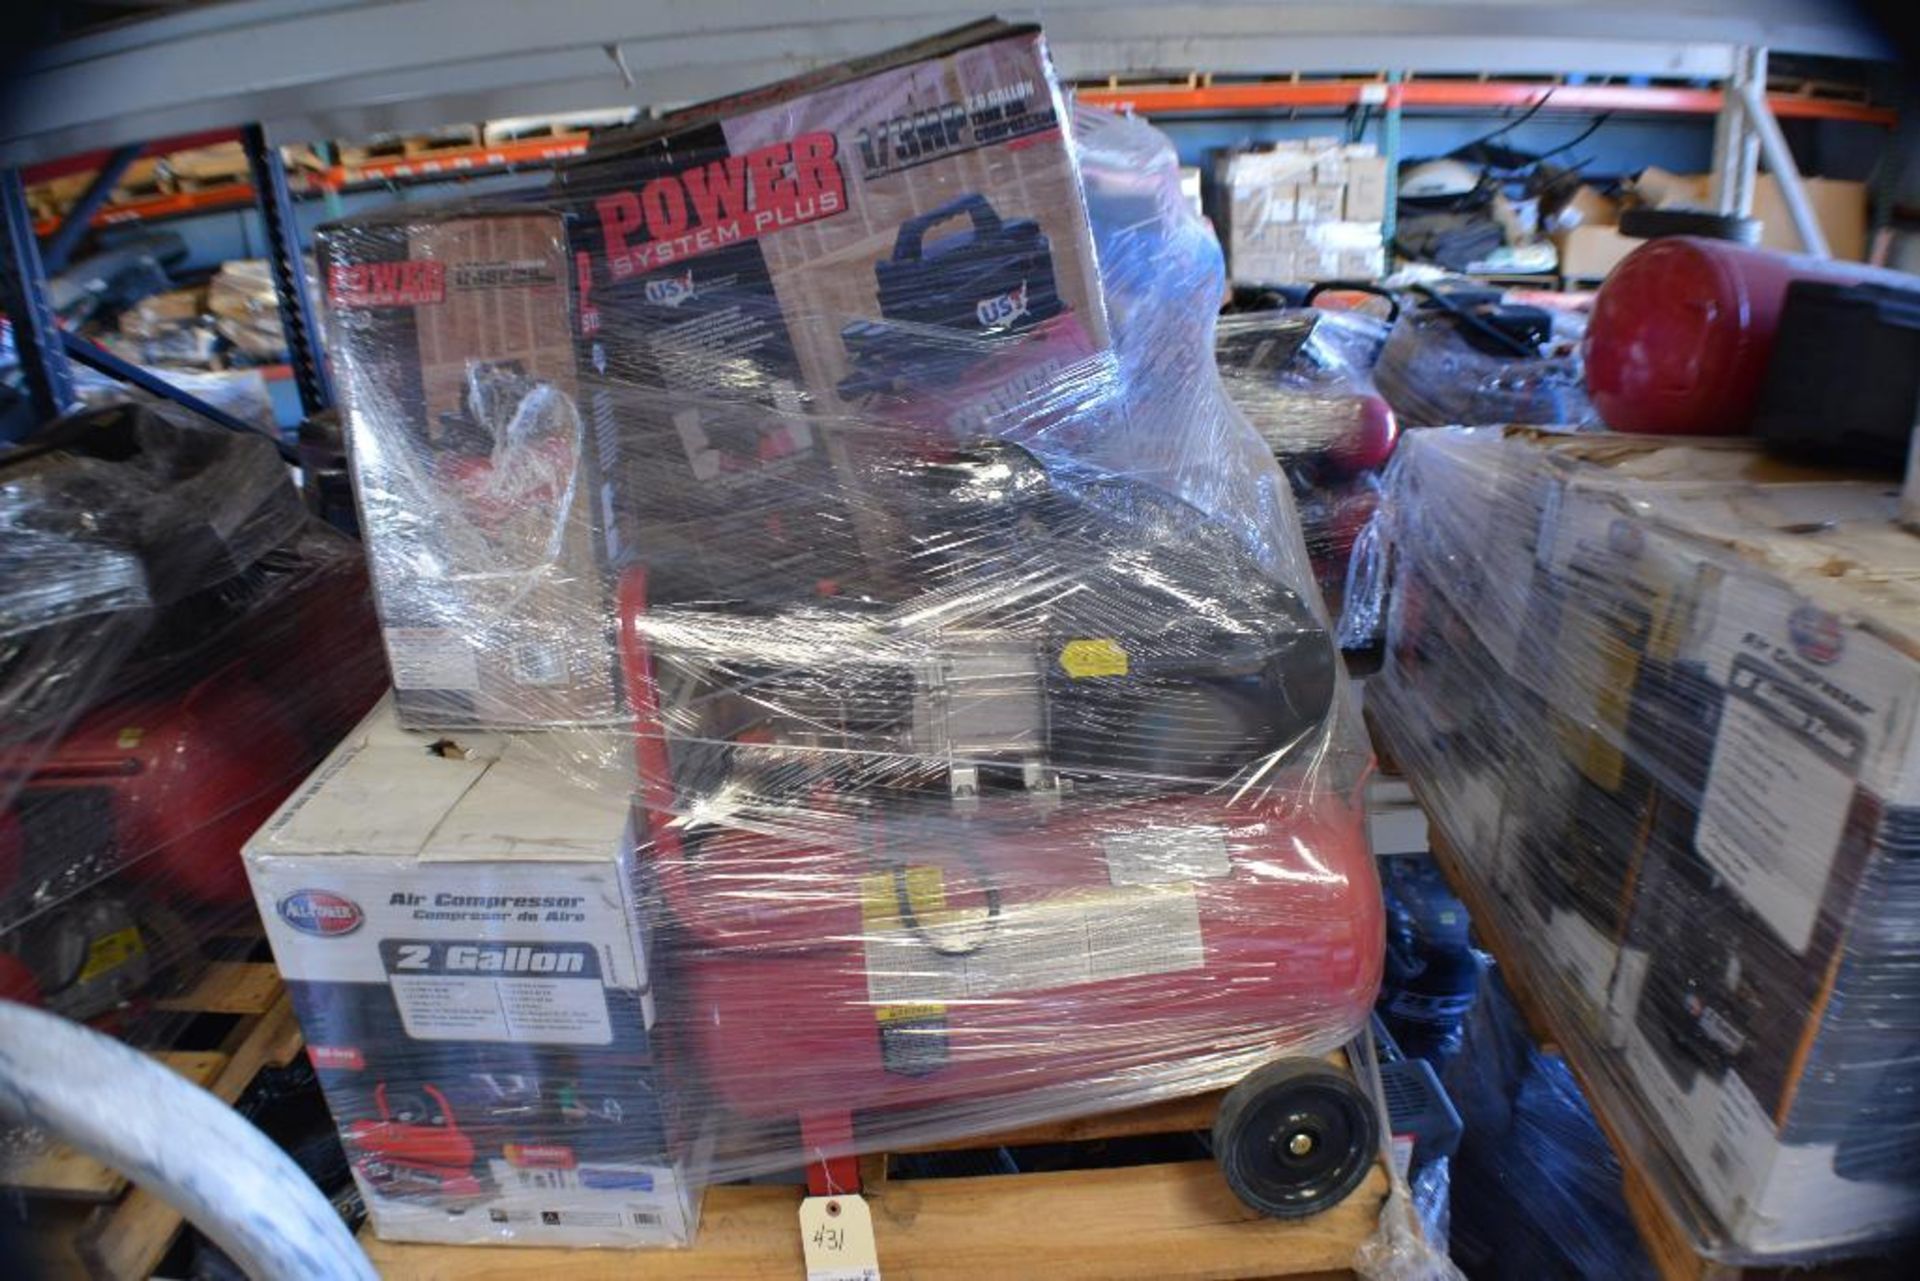 Air Compressors. Assorted Sizes and Models Contents of Pallet